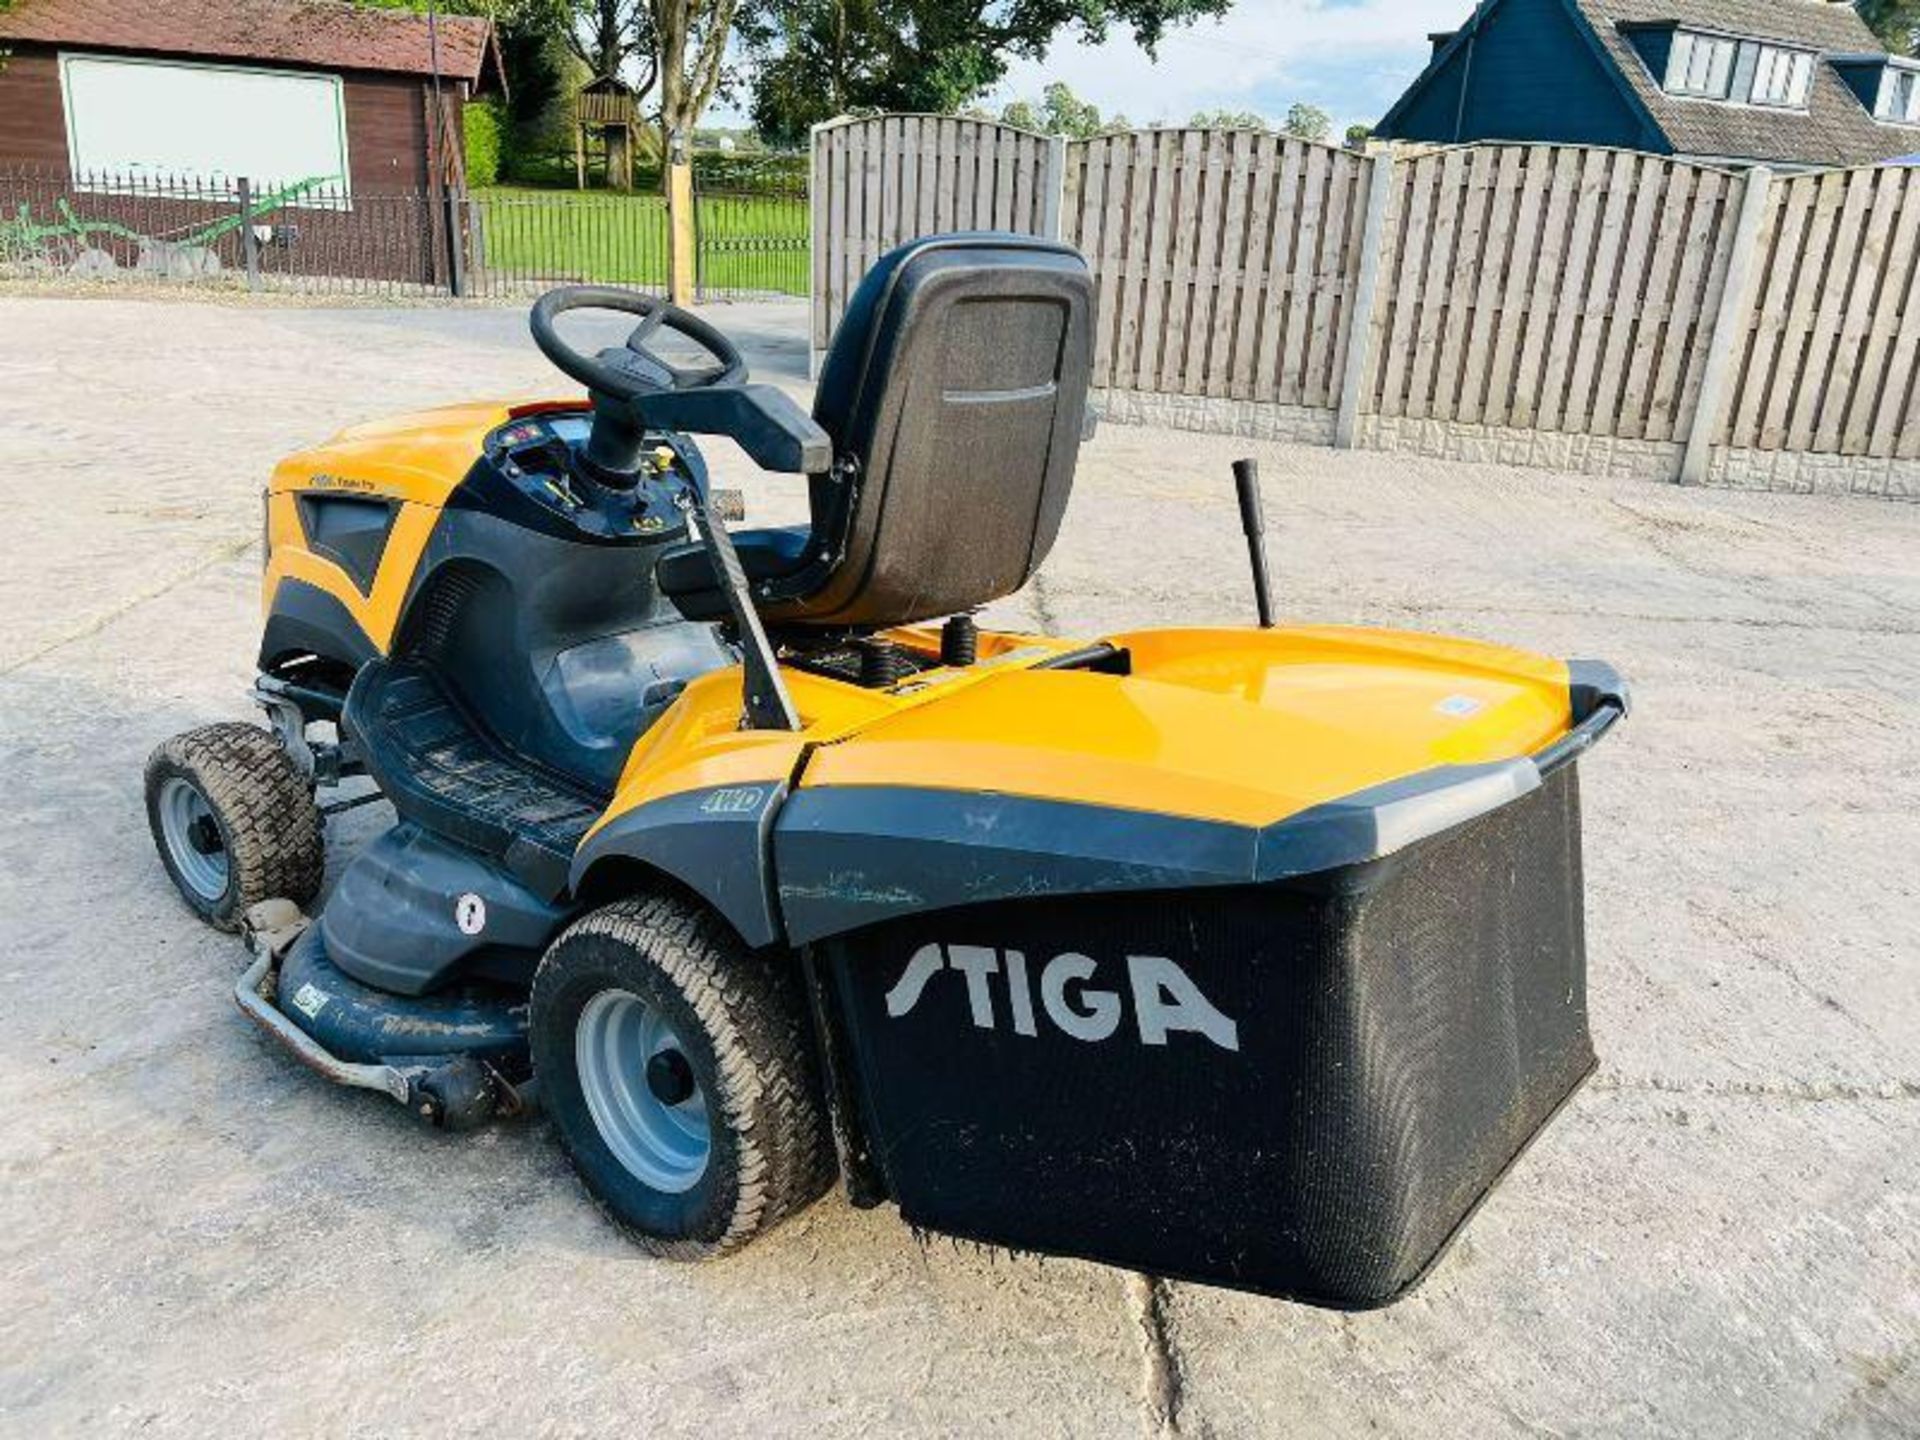 STIGA 4WD RIDE ON MOWER *YEAR 2016, 240 HOURS* C/W COLLECTION BOX - Image 11 of 12